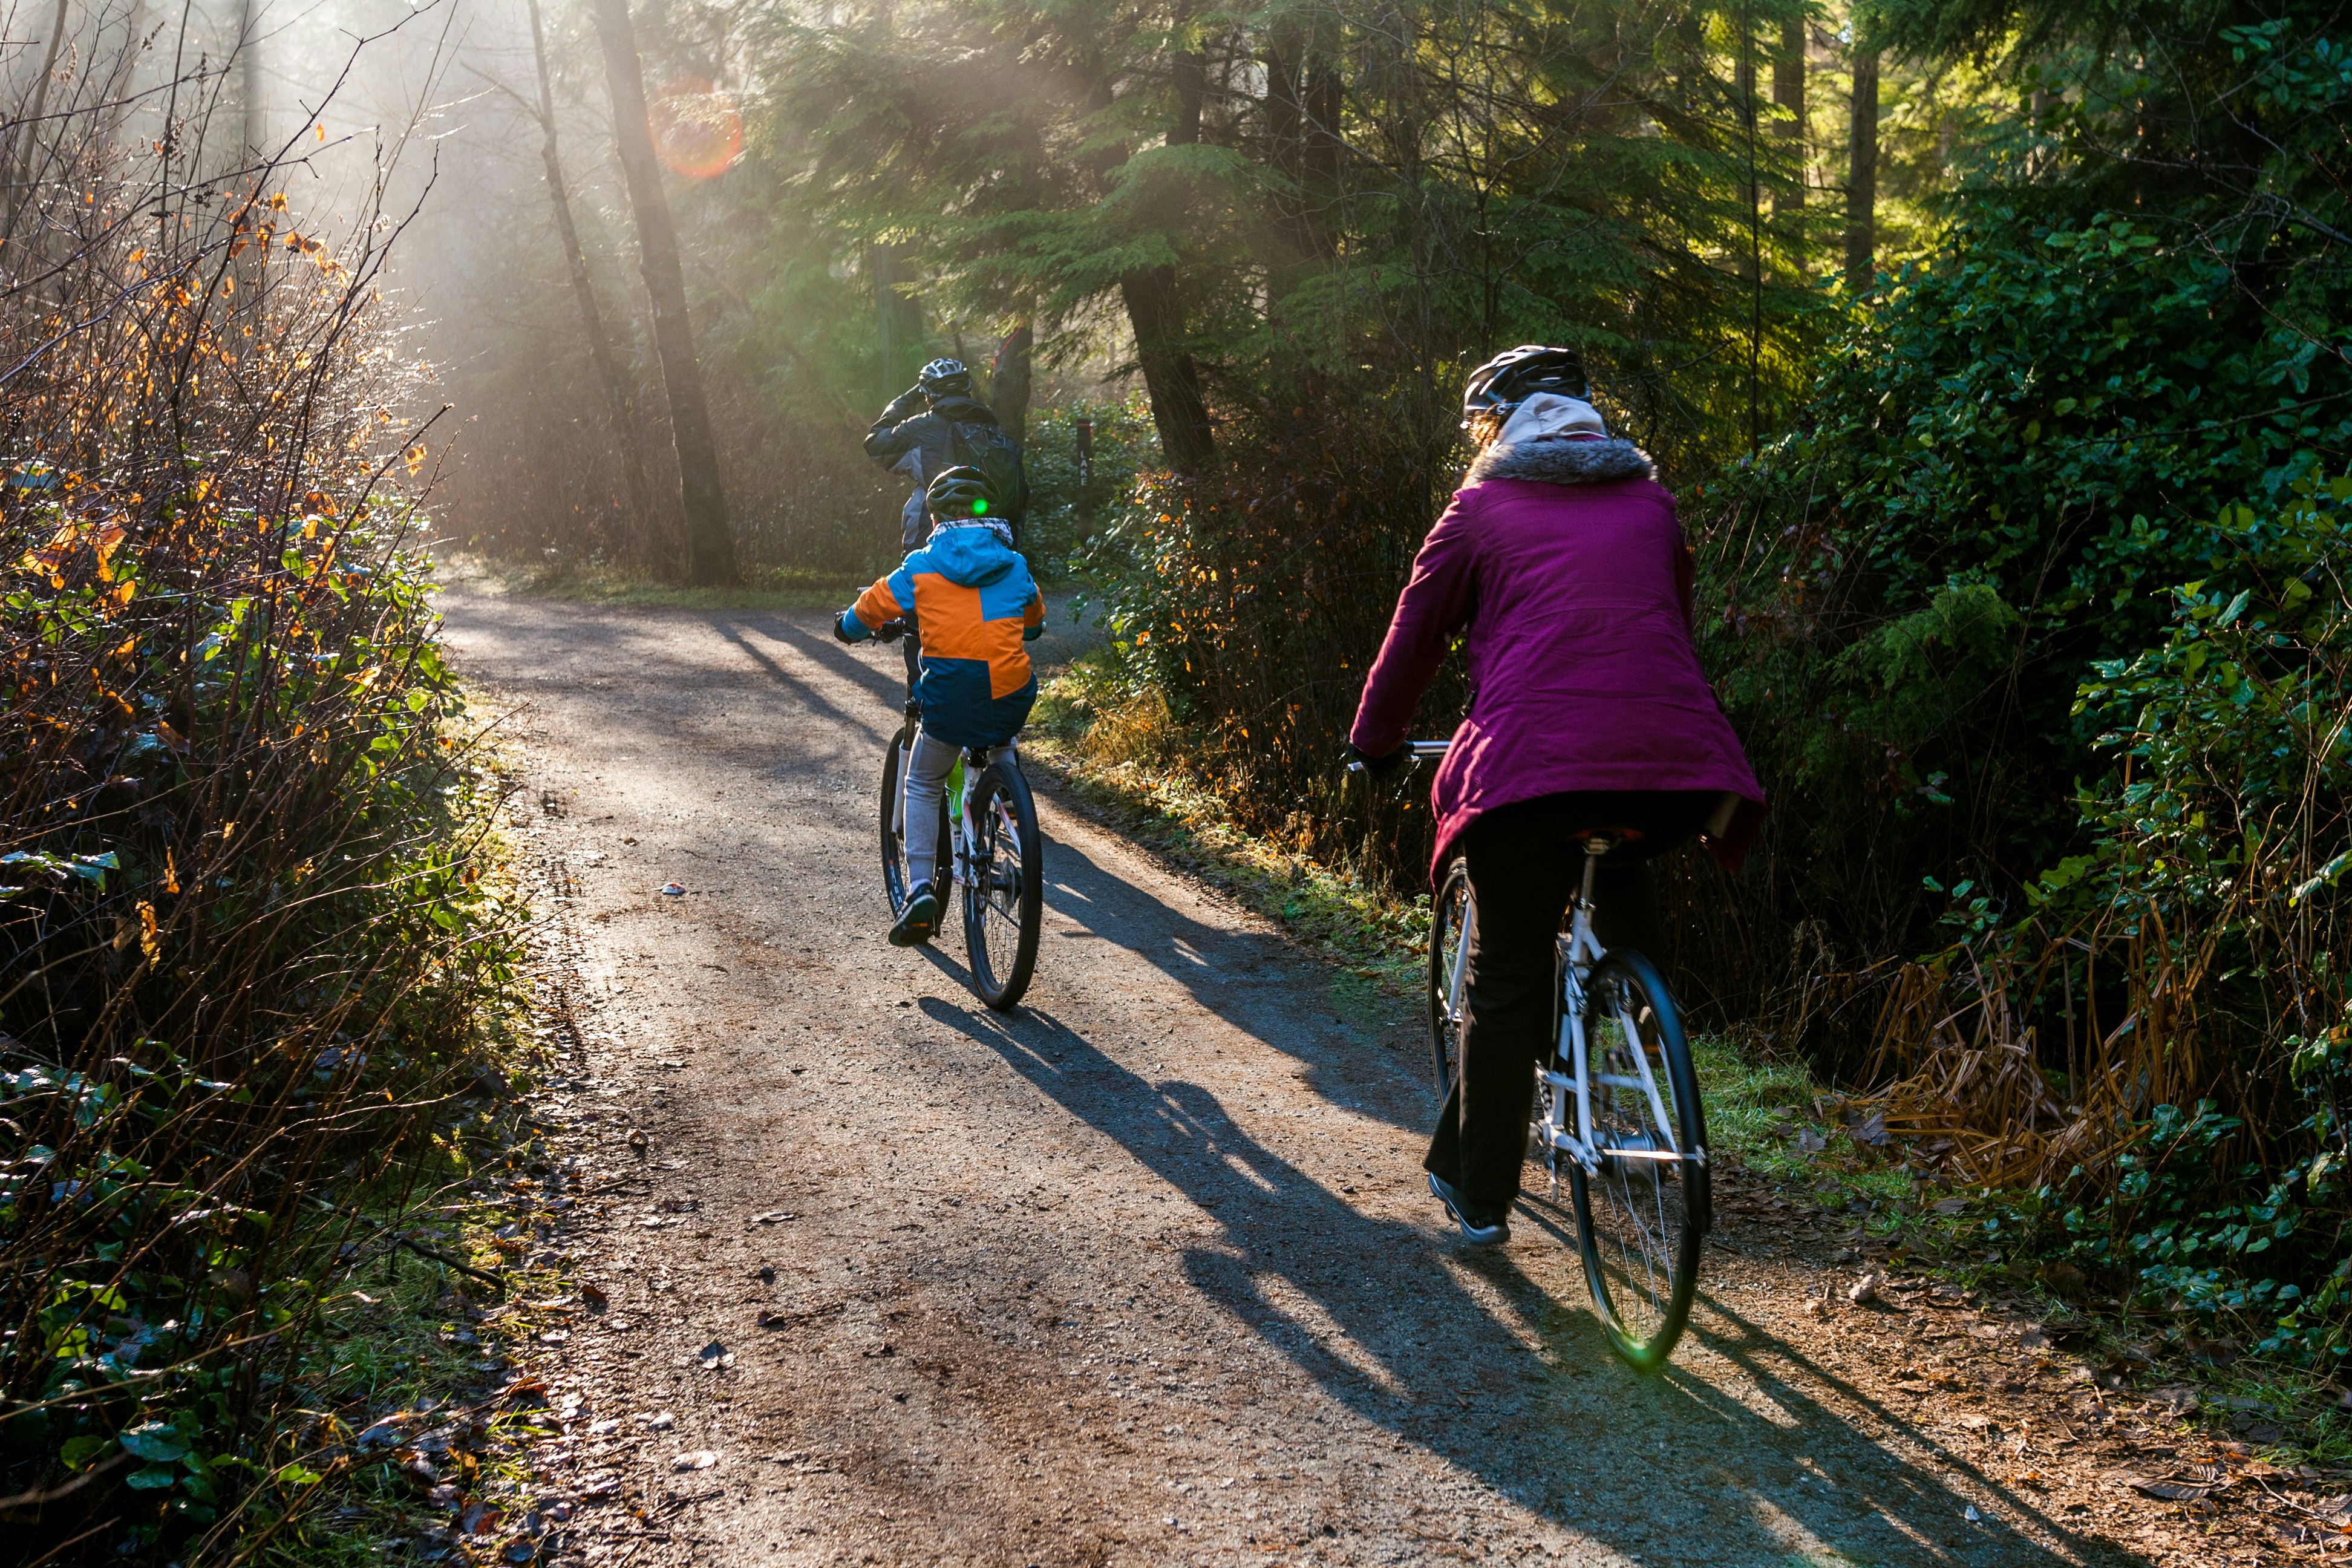 An adult and child cycle through a forested park